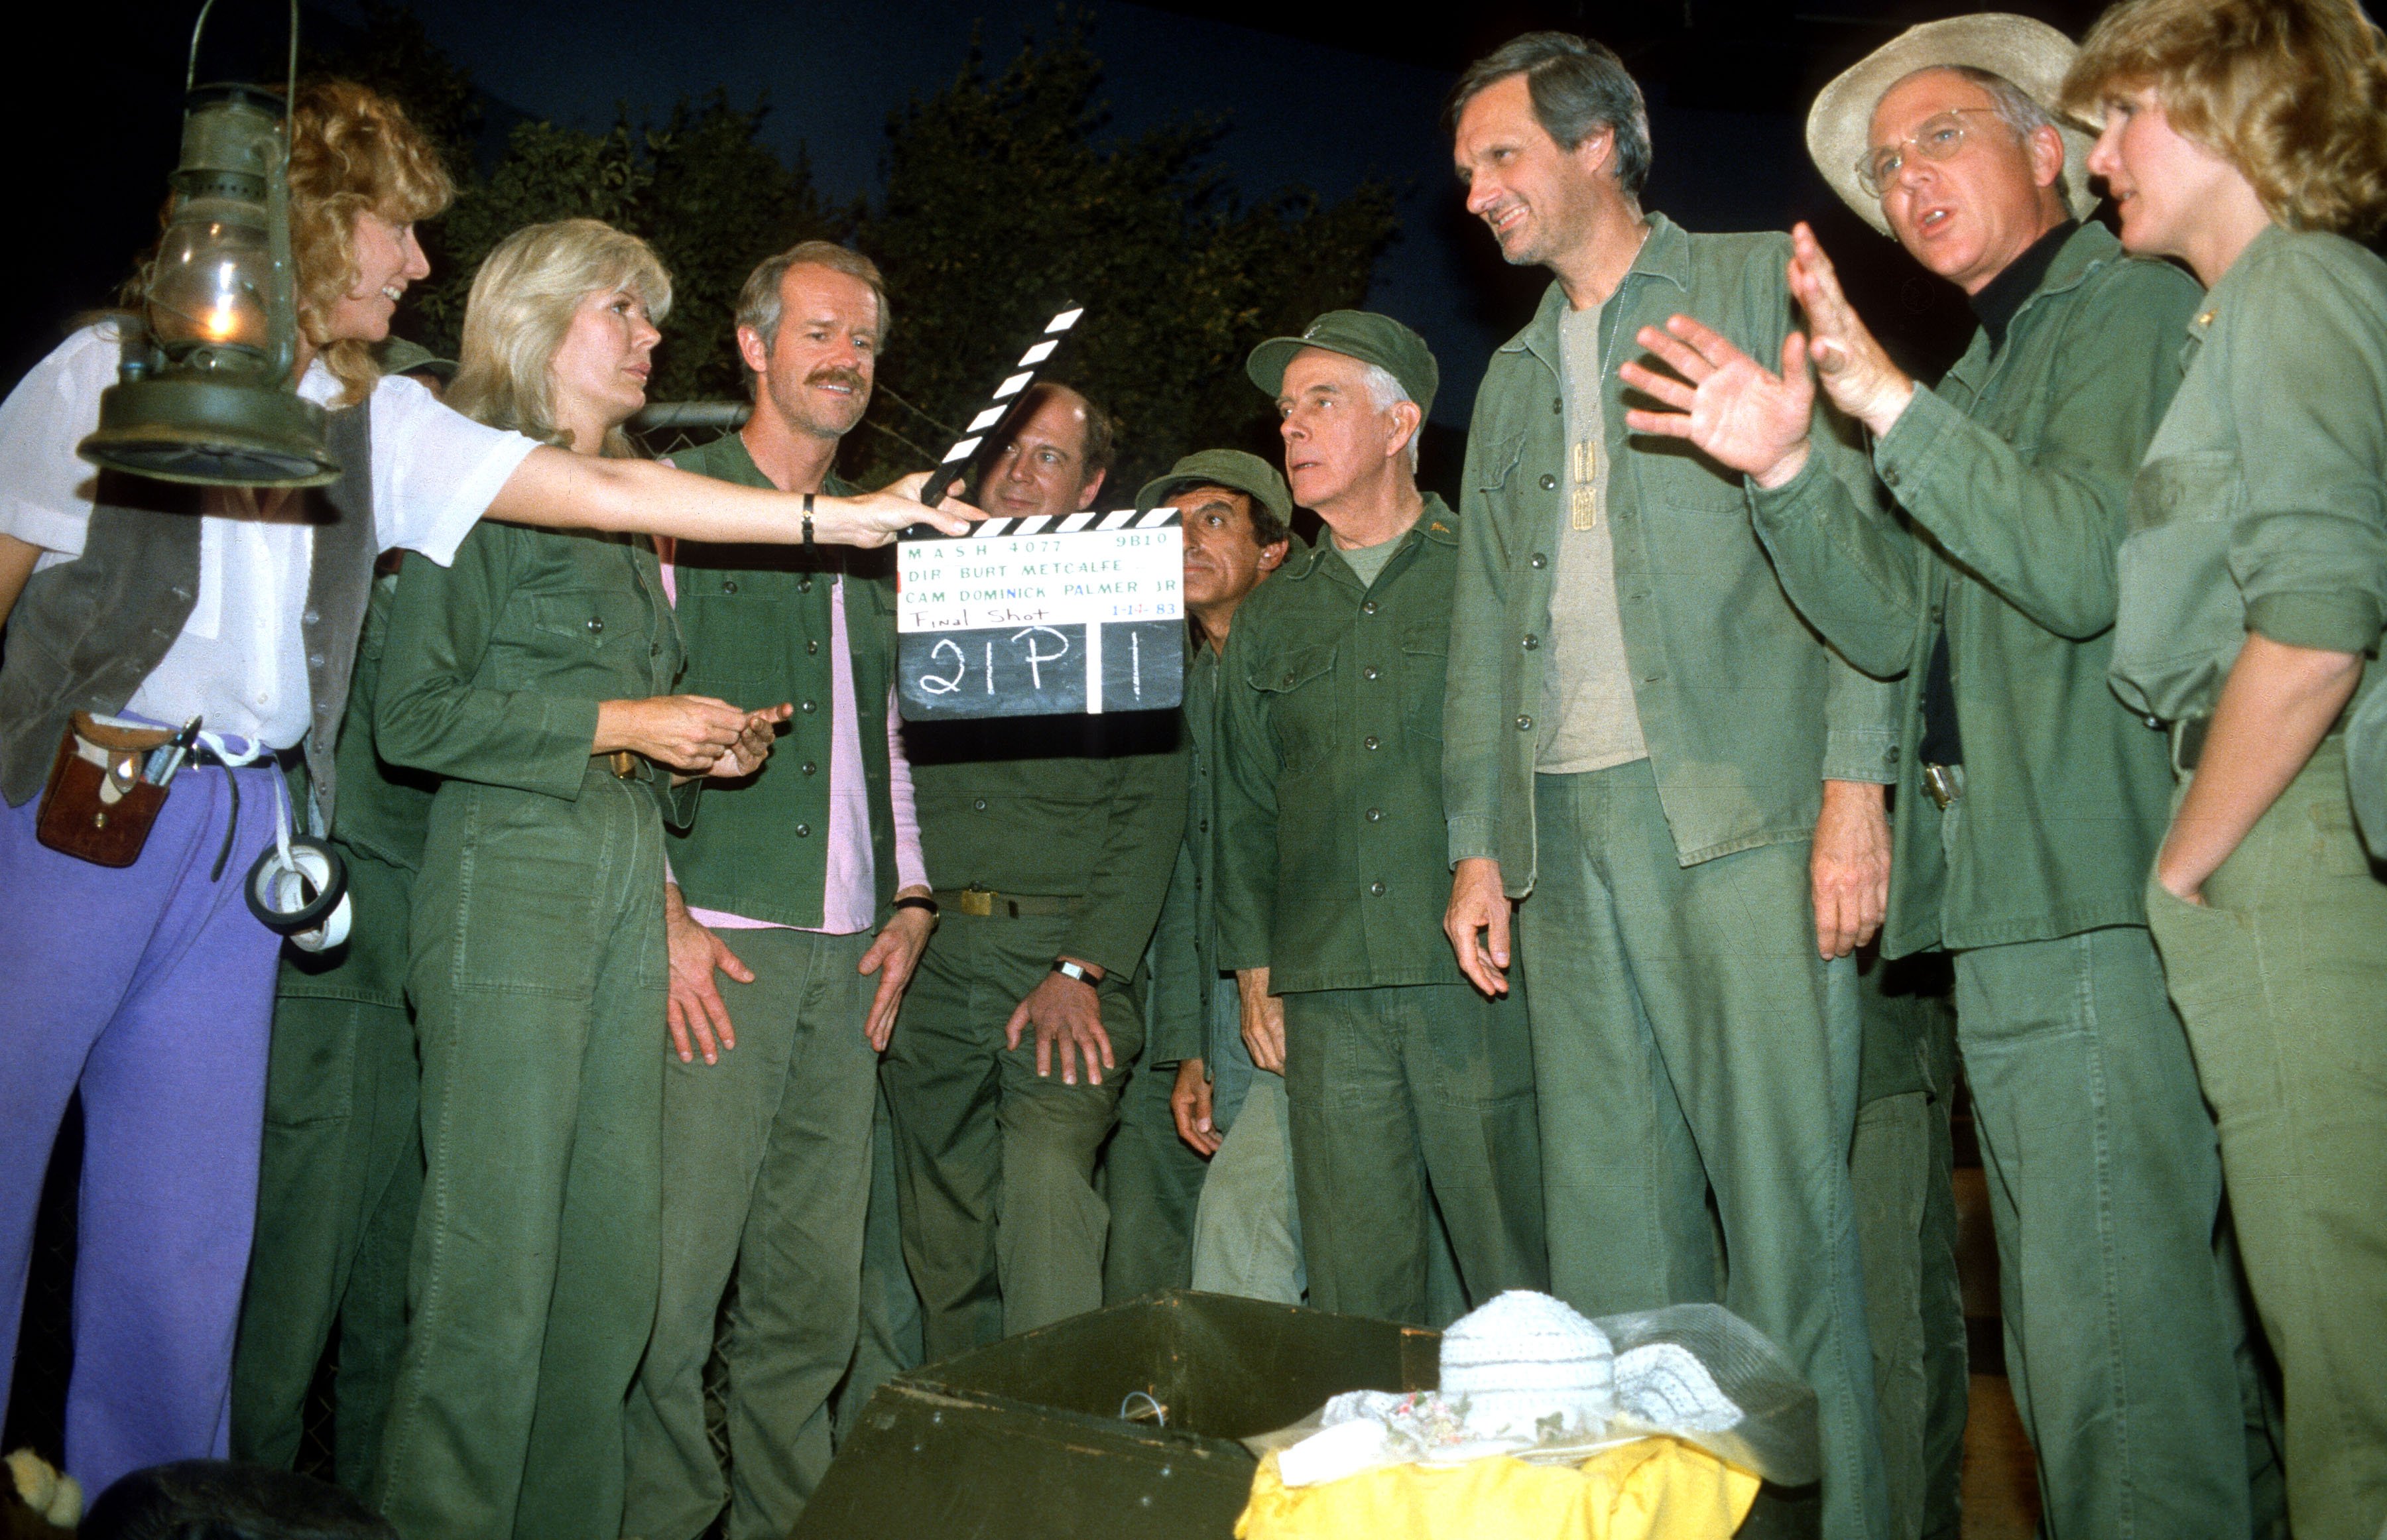 From second left: Loretta Swit, Mike Farrell, David Ogden Stiers, Jamie Farr, Harry Morgan, Alan Alda, William Christopher and Judy Farrell at the shooting of the last episode of "M*A*S*H" on Fox Ranch on June 18, 1984 | Source: Getty Images